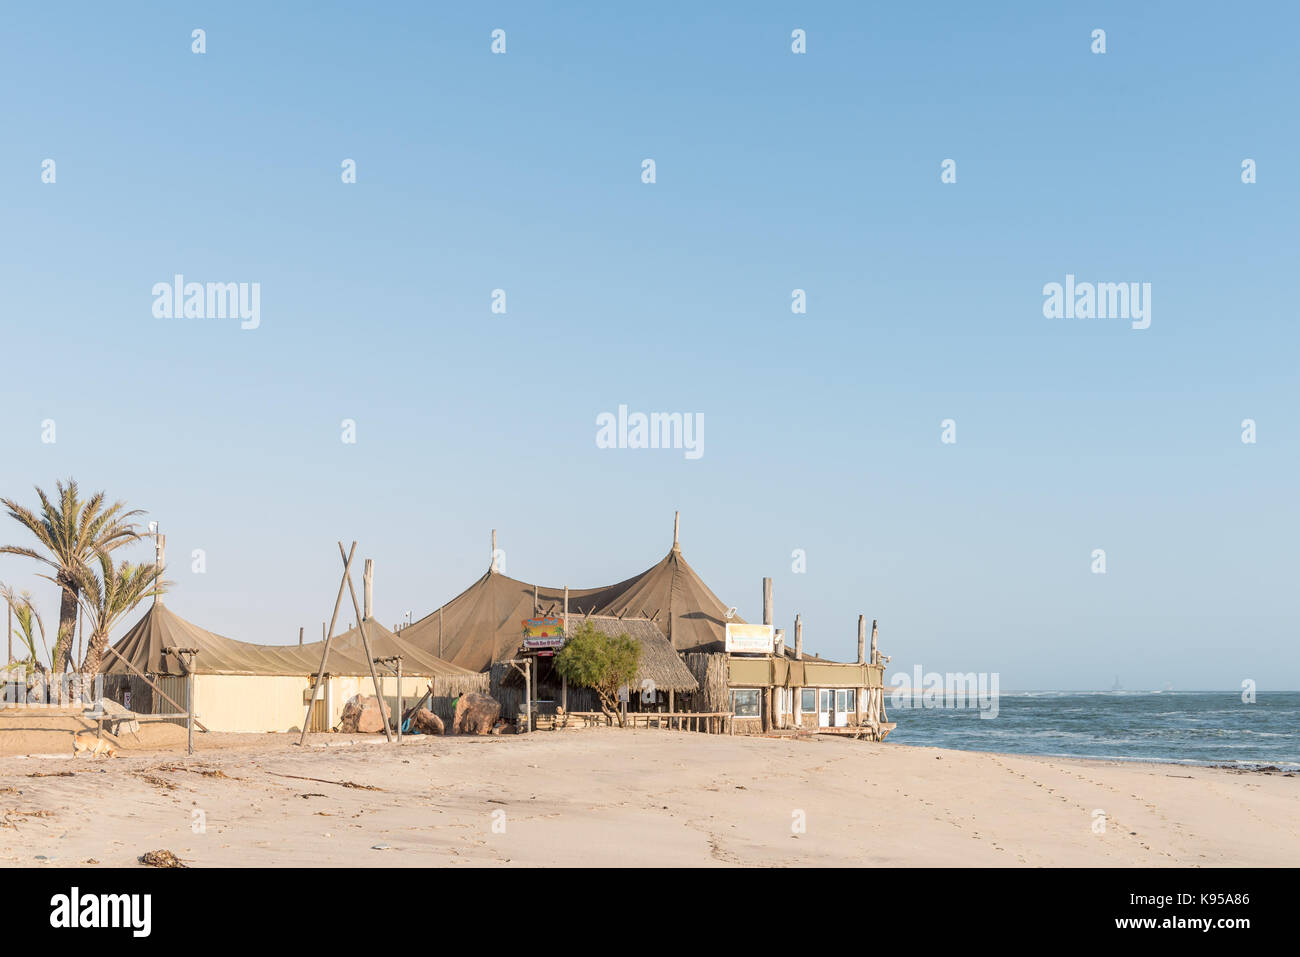 SWAKOPMUND, NAMIBIA - JUNE 30, 2017: Entrance of the Tiger Reef restaurant and bar in Swakopmund in the Namib Desert on the Atlantic Coast of Namibia Stock Photo